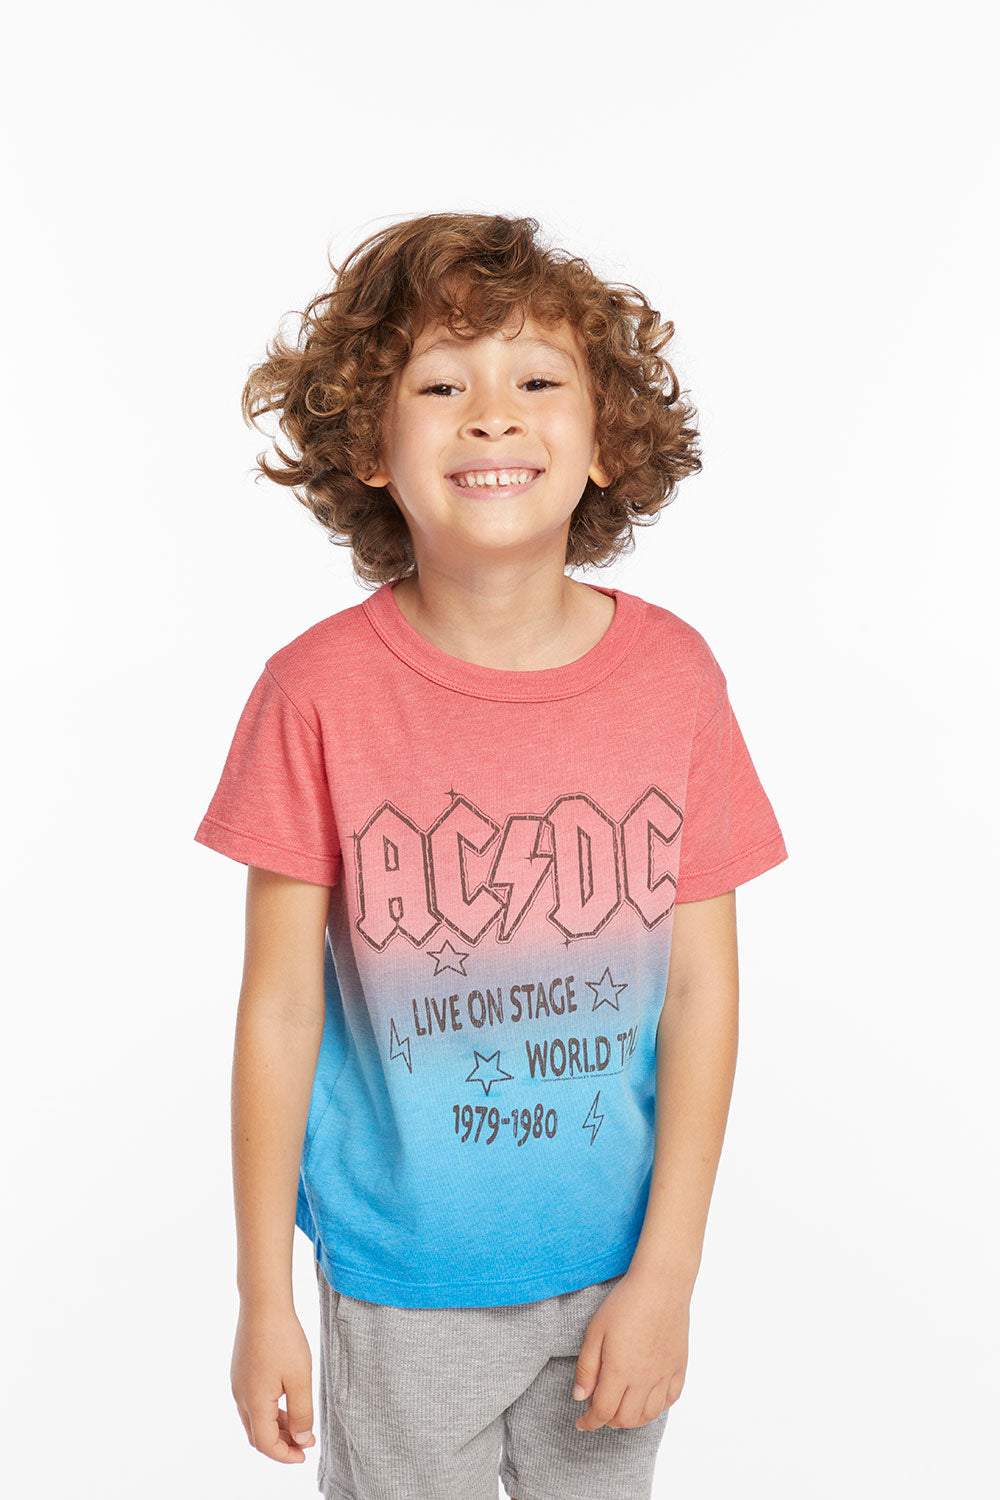 AC/DC Live On Stage Boys Tee BOYS chaserbrand